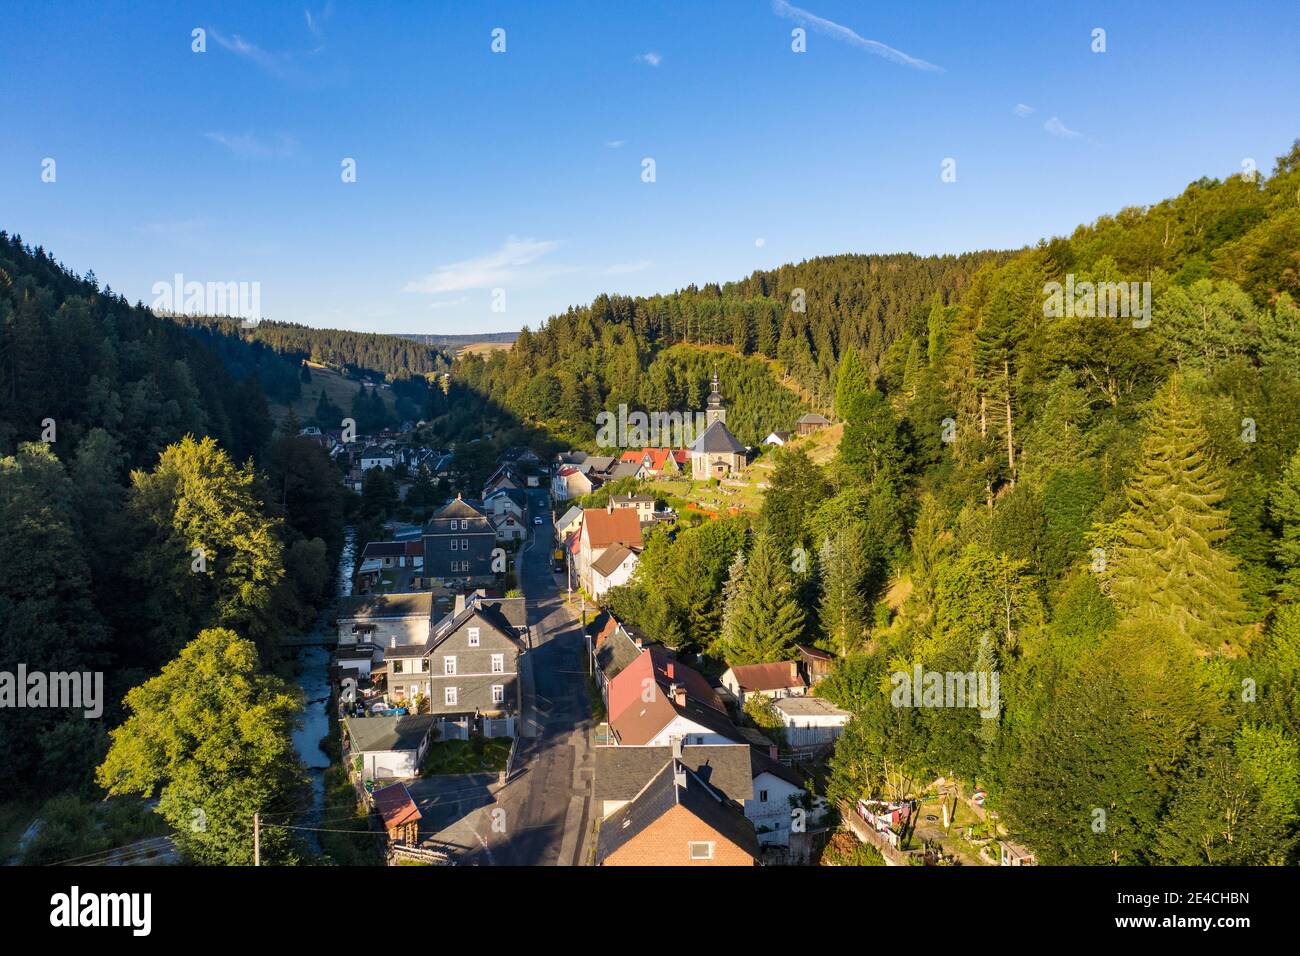 Germany, Thuringia, Katzhütte, houses, church, streets, forest Stock Photo